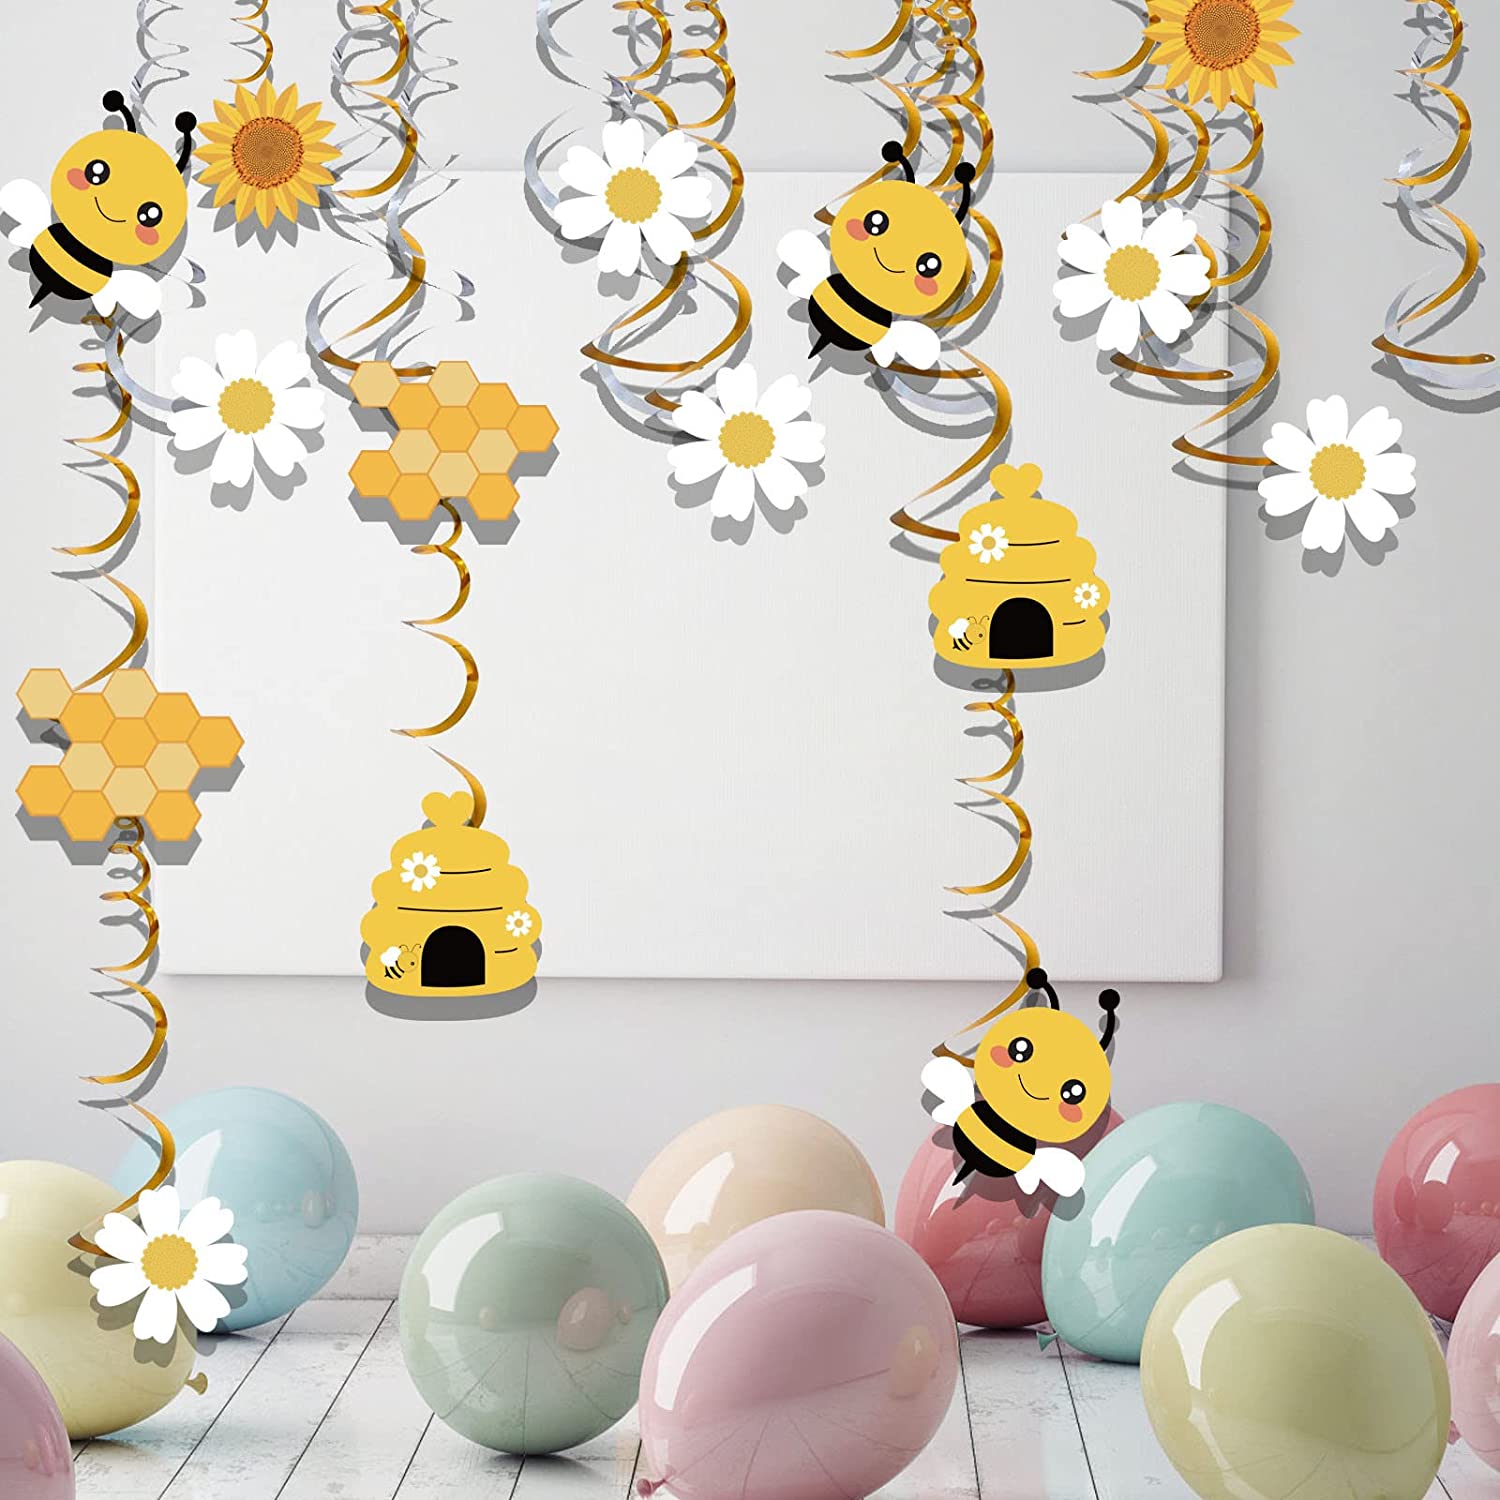 puphutu Honey Bee Decorations for Party 40 Pieces Bumble Bee Hanging Swirl Decor Bee Themed Baby Shower Supplies, Infant Unisex, Size: One Size